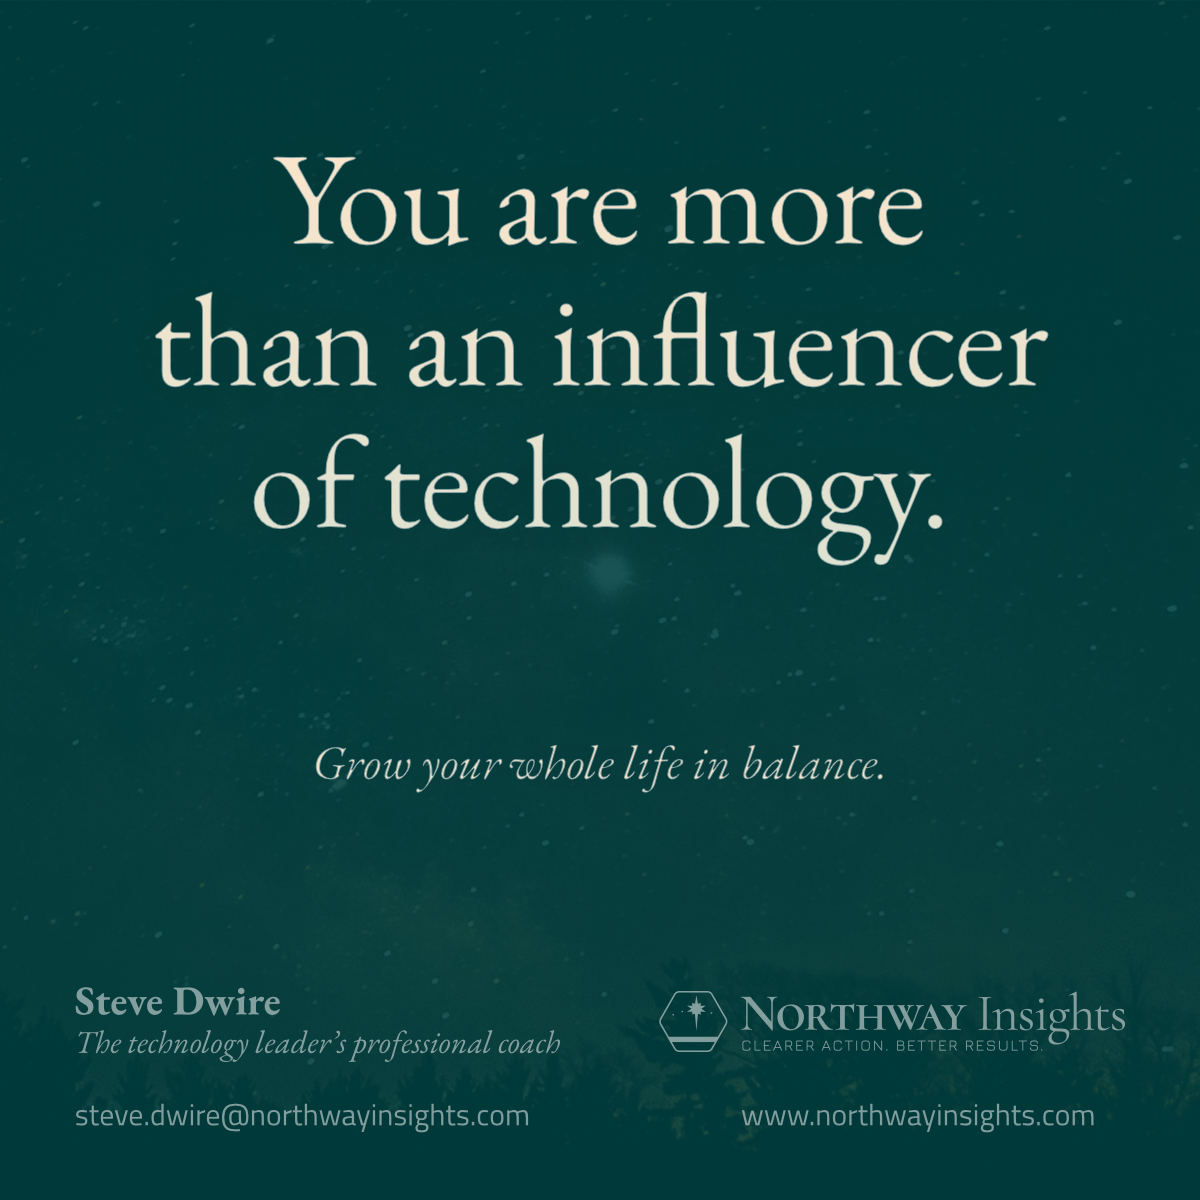 You are more than an influencer of technology. (Grow your whole life in balance.)